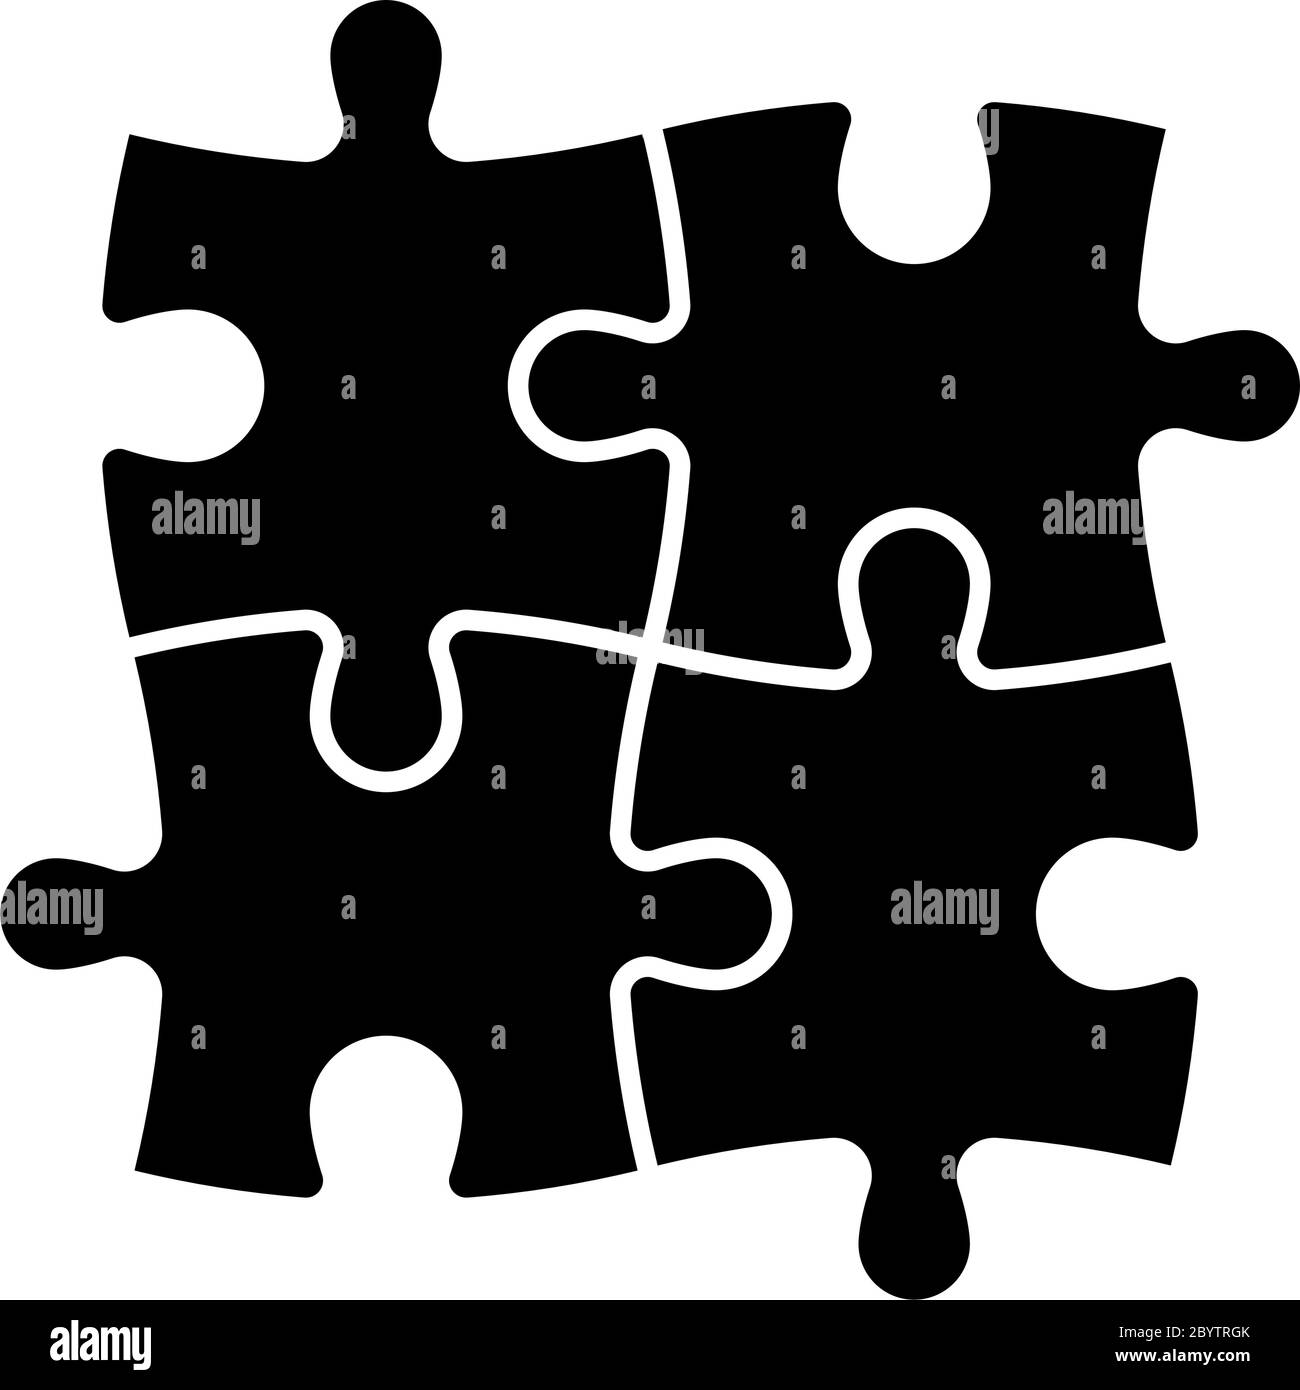 The four square Black and White Stock Photos & Images - Page 2 - Alamy